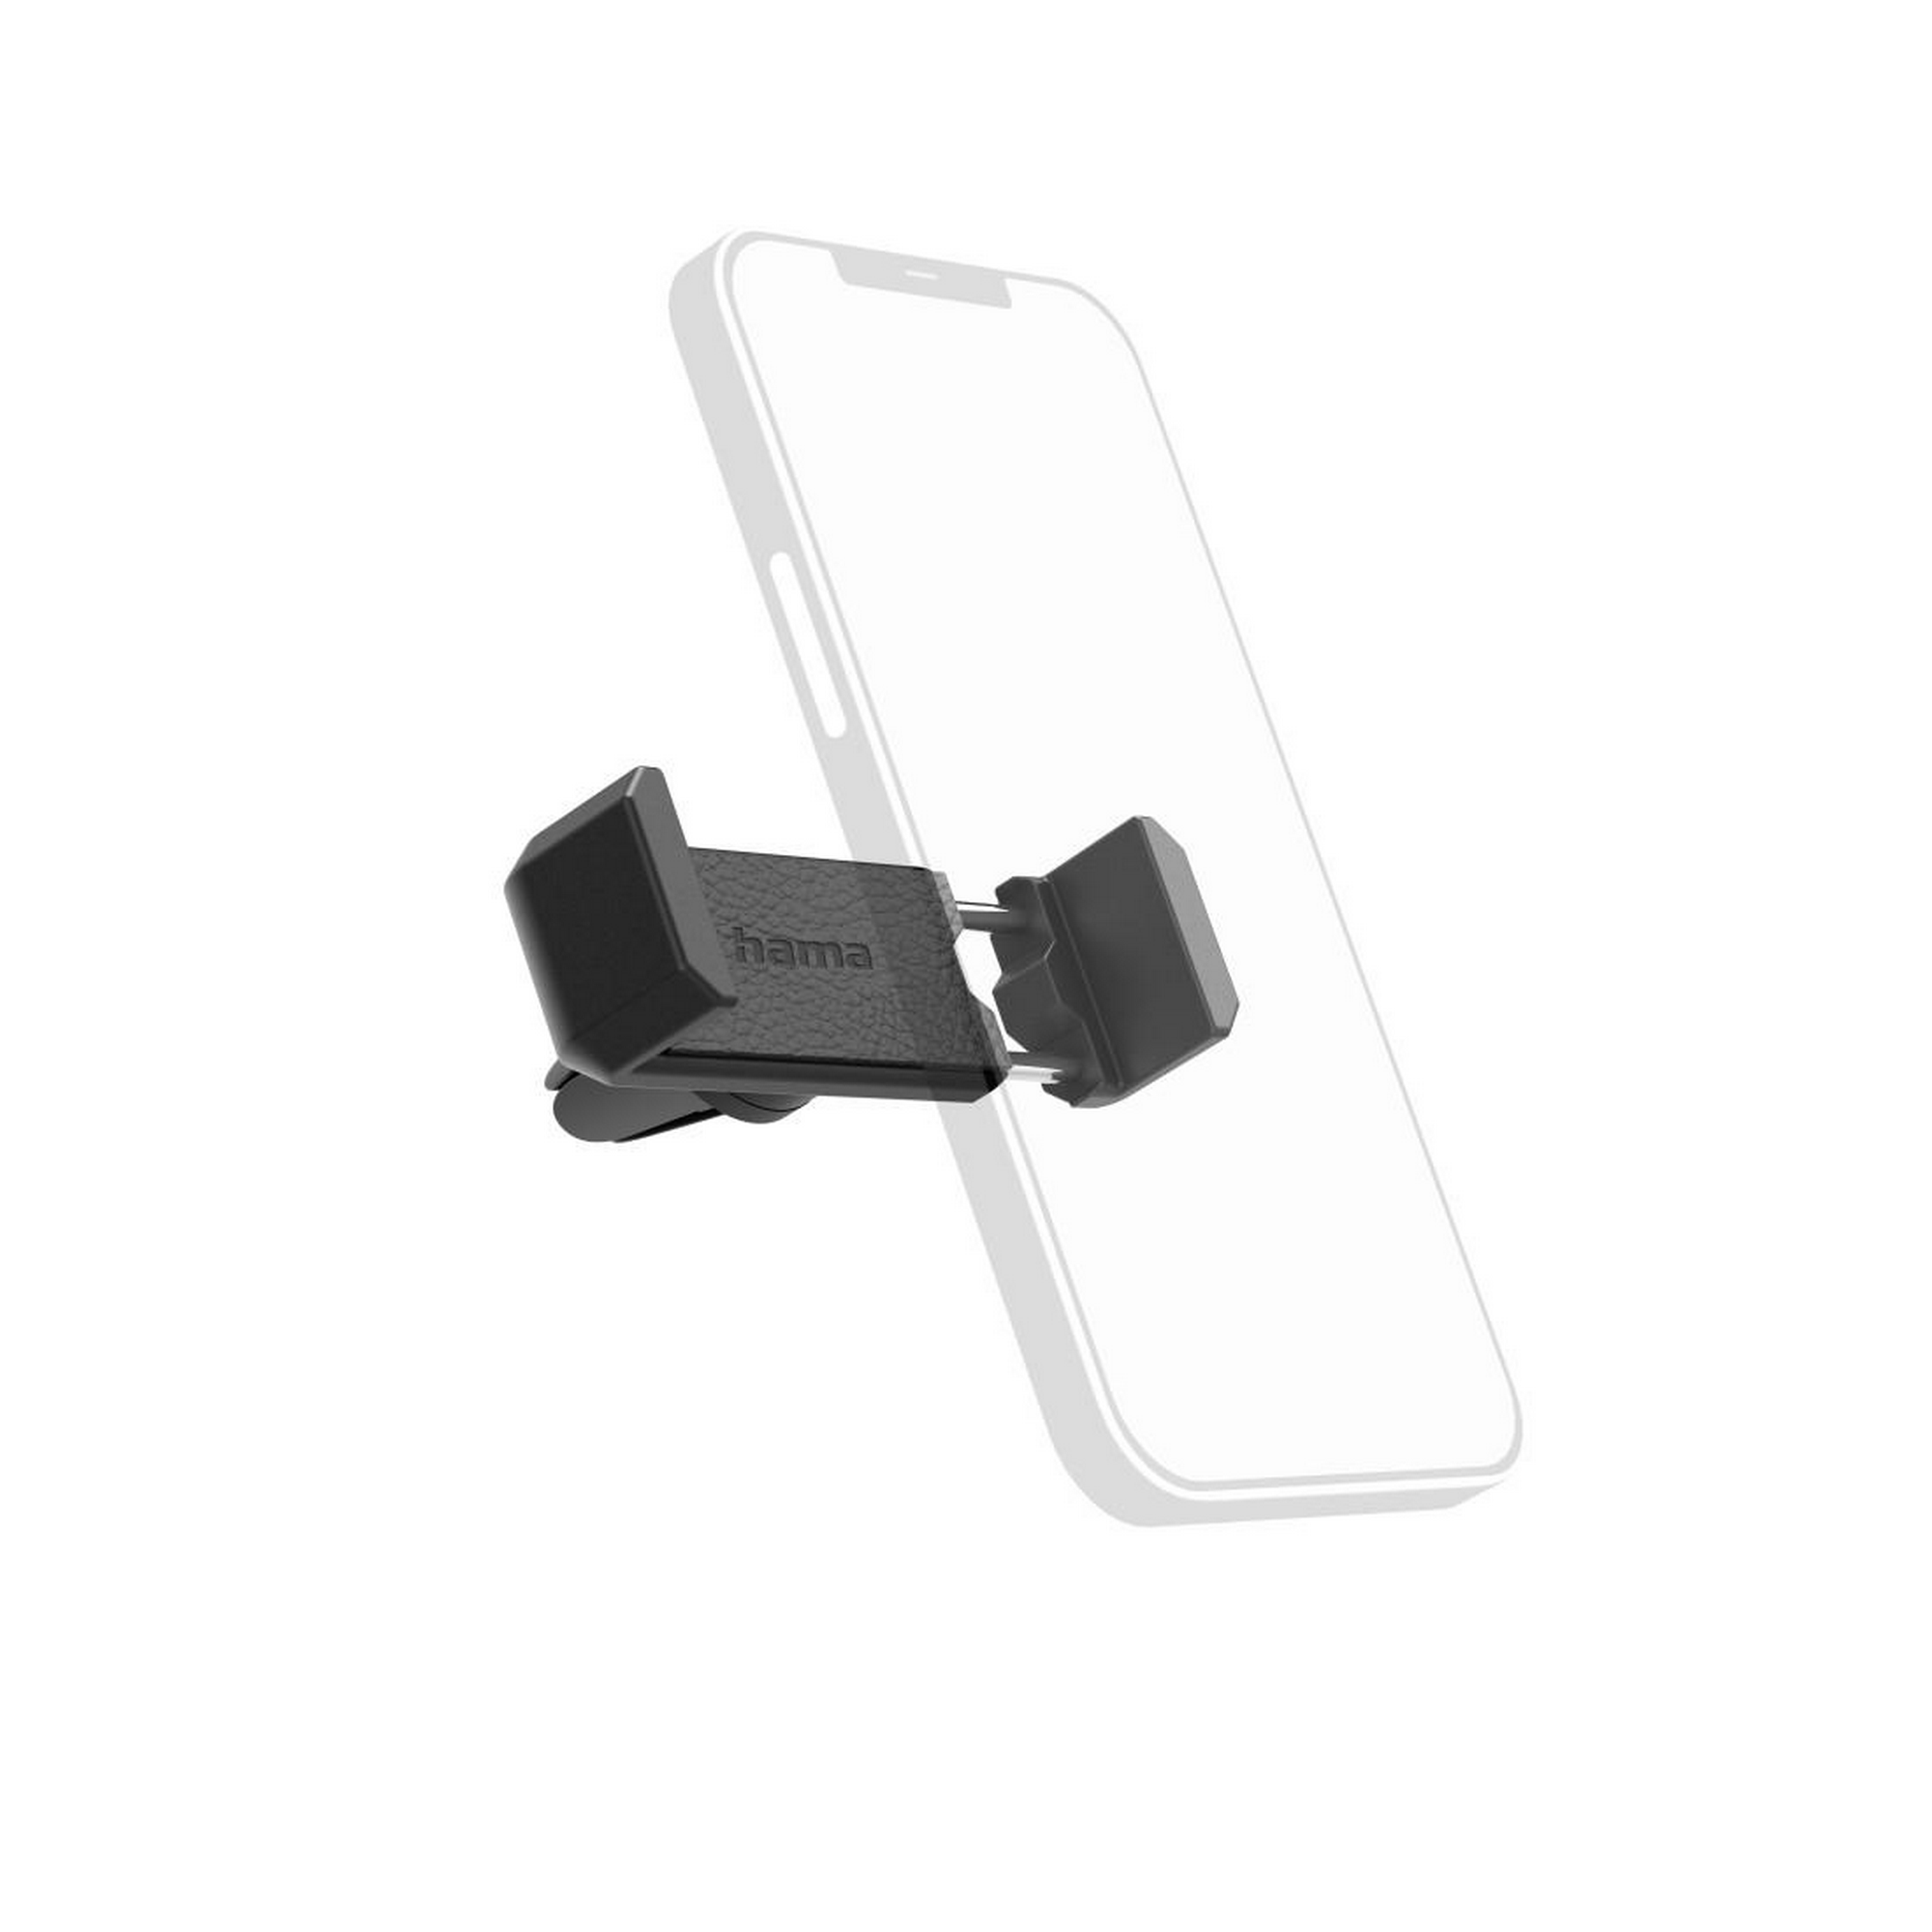 Universal-Smartphone-Halter 'Compact' + product picture